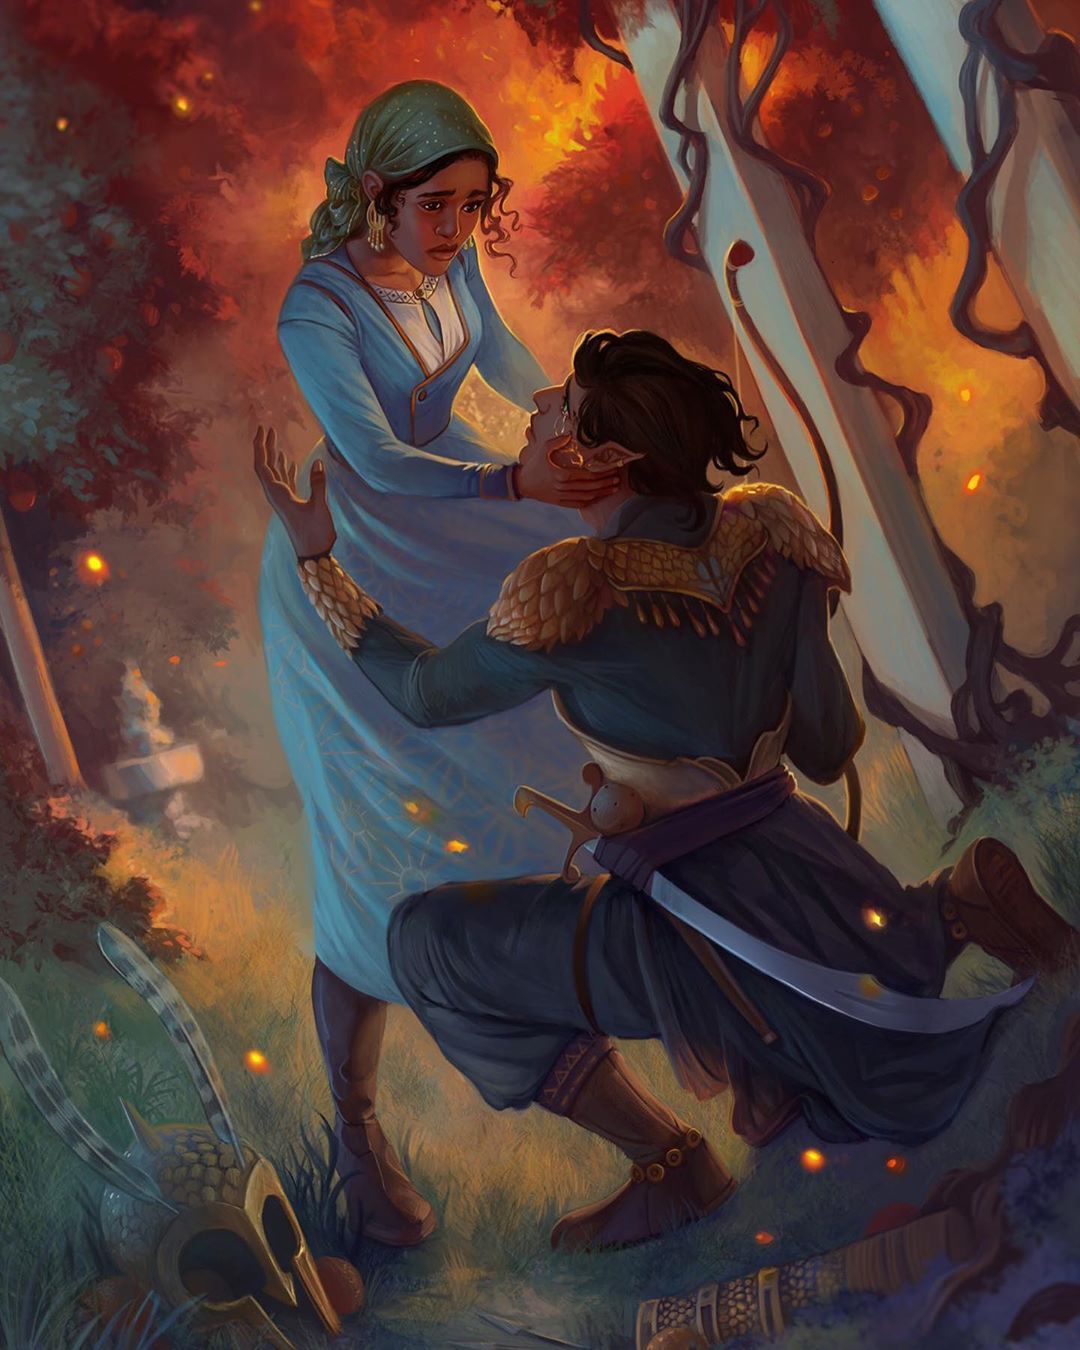 Alizayd and Nahri from "City of Brass."